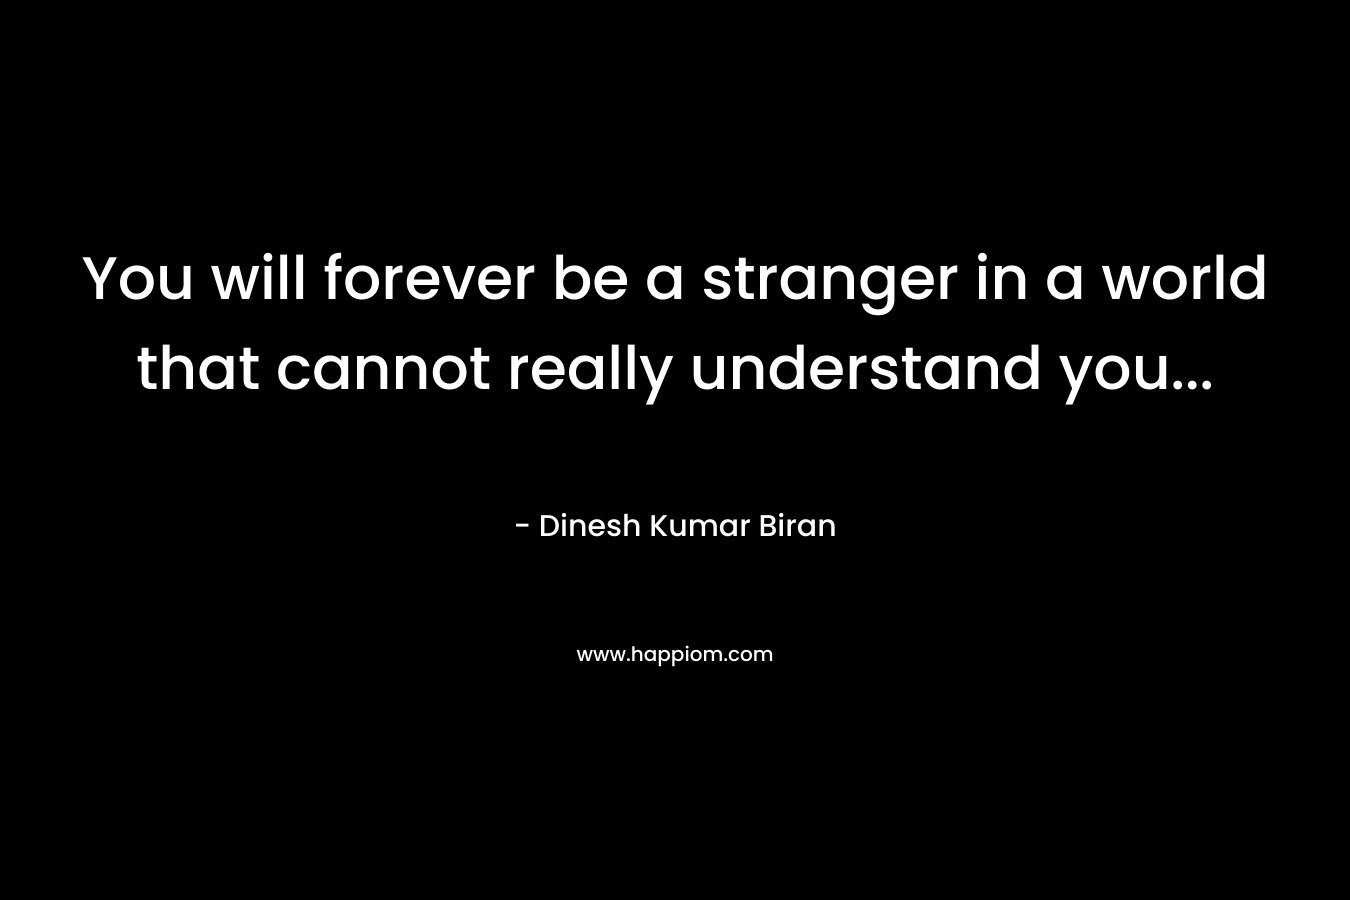 You will forever be a stranger in a world that cannot really understand you...